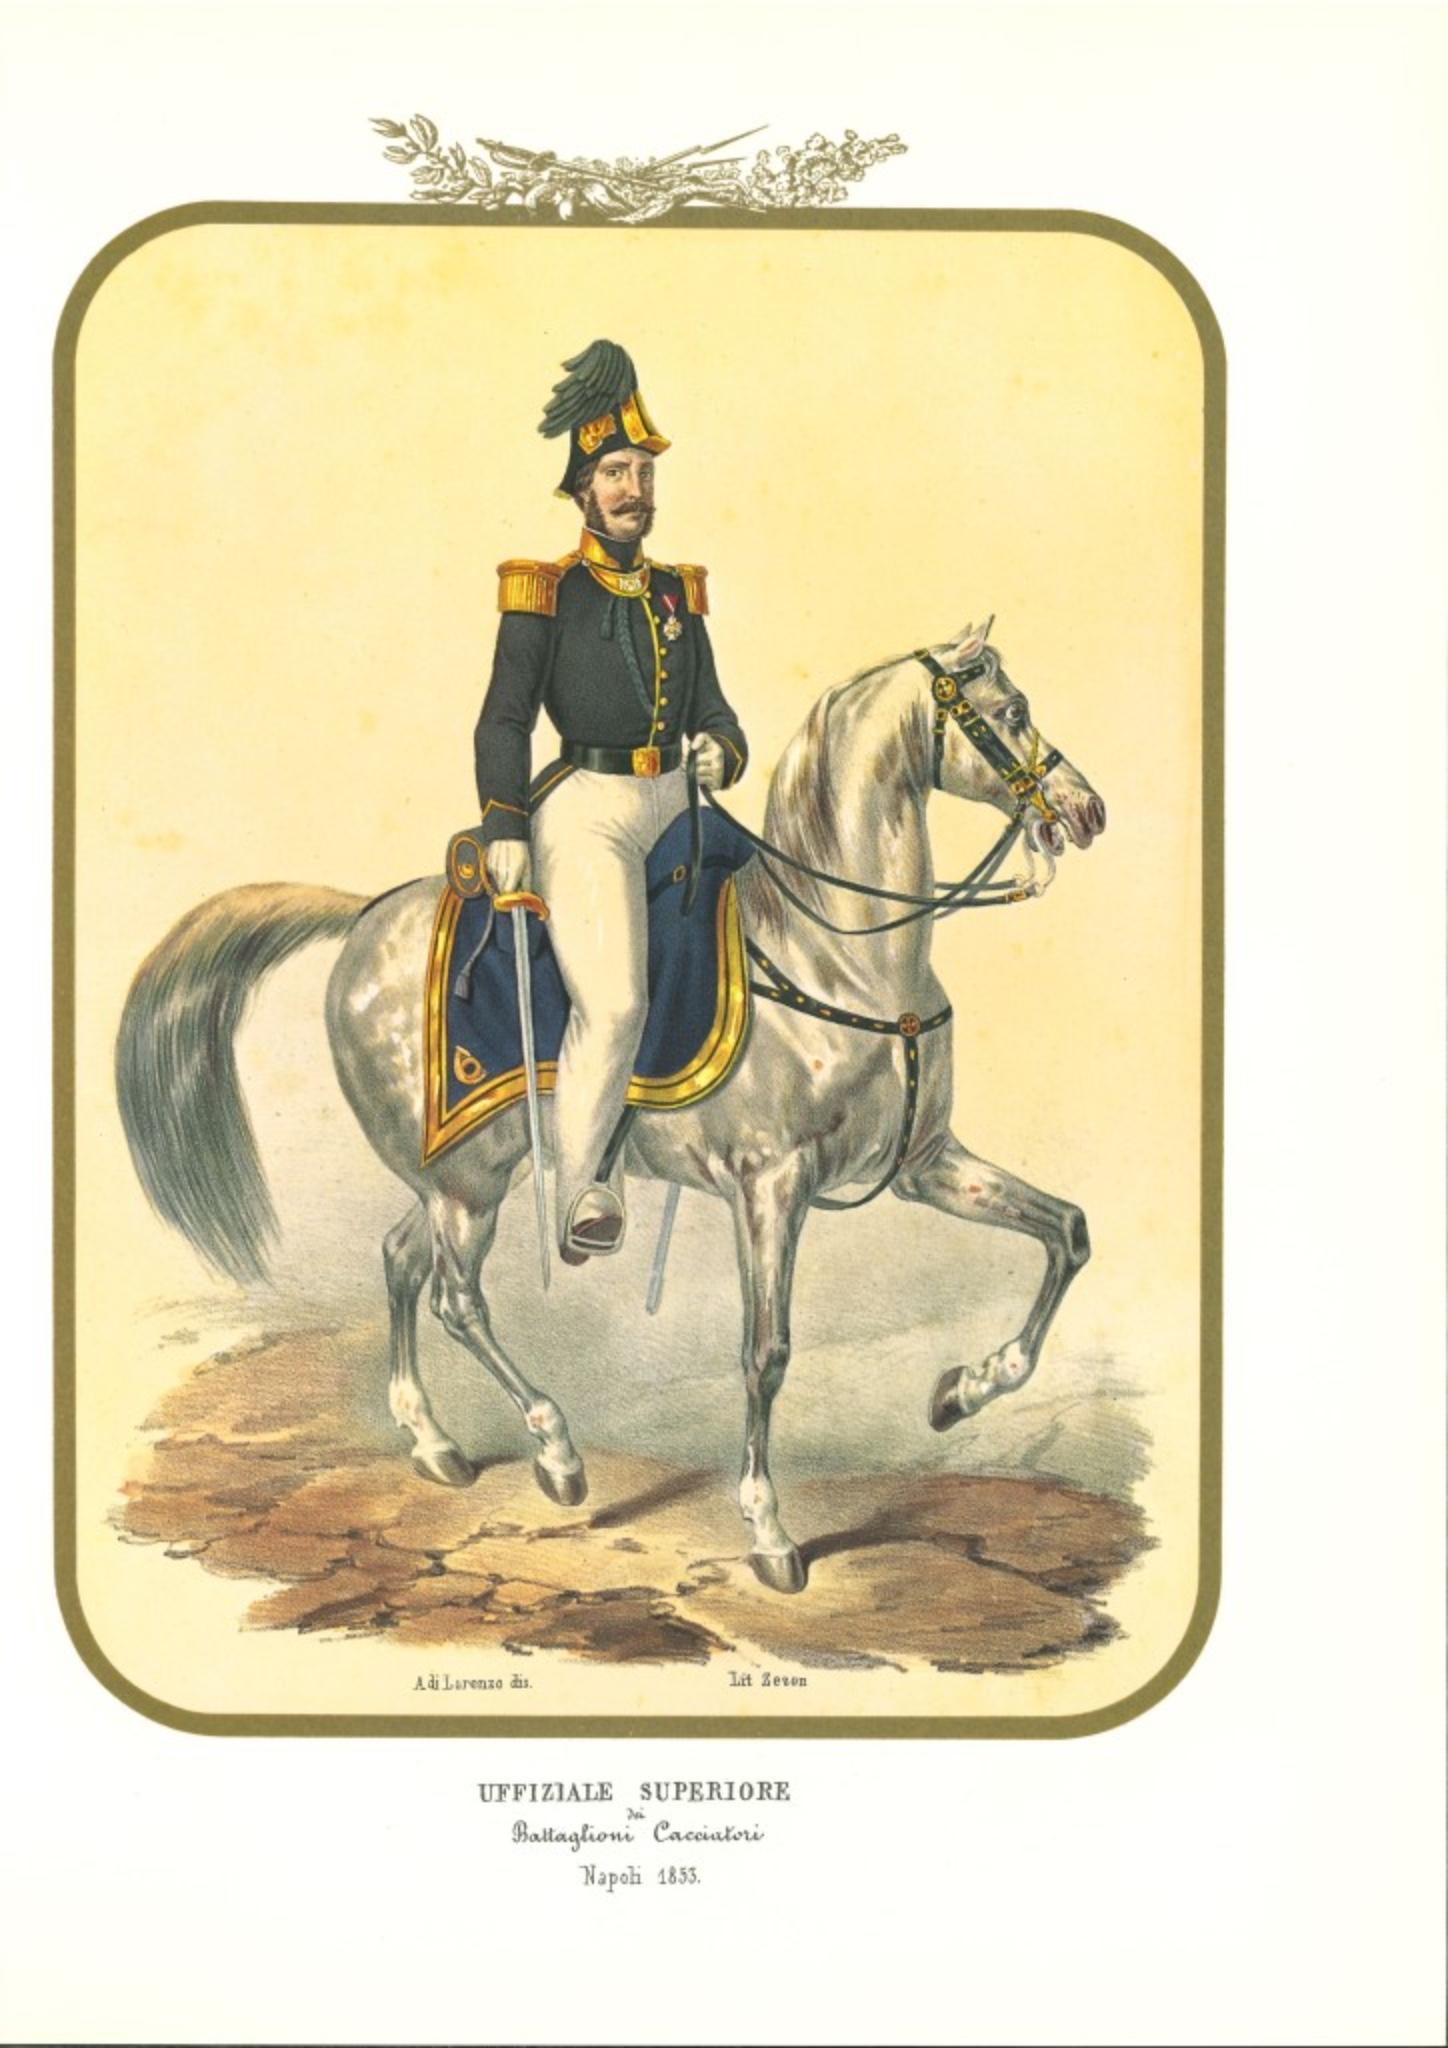 Senior Officer is a lithograph by Antonio Zezon. Naples 1853.

Interesting colored lithograph which describes a Senior Officer of the Hunter Battalions riding his horse.

In excellent condition, this print belongs to one of the most famous